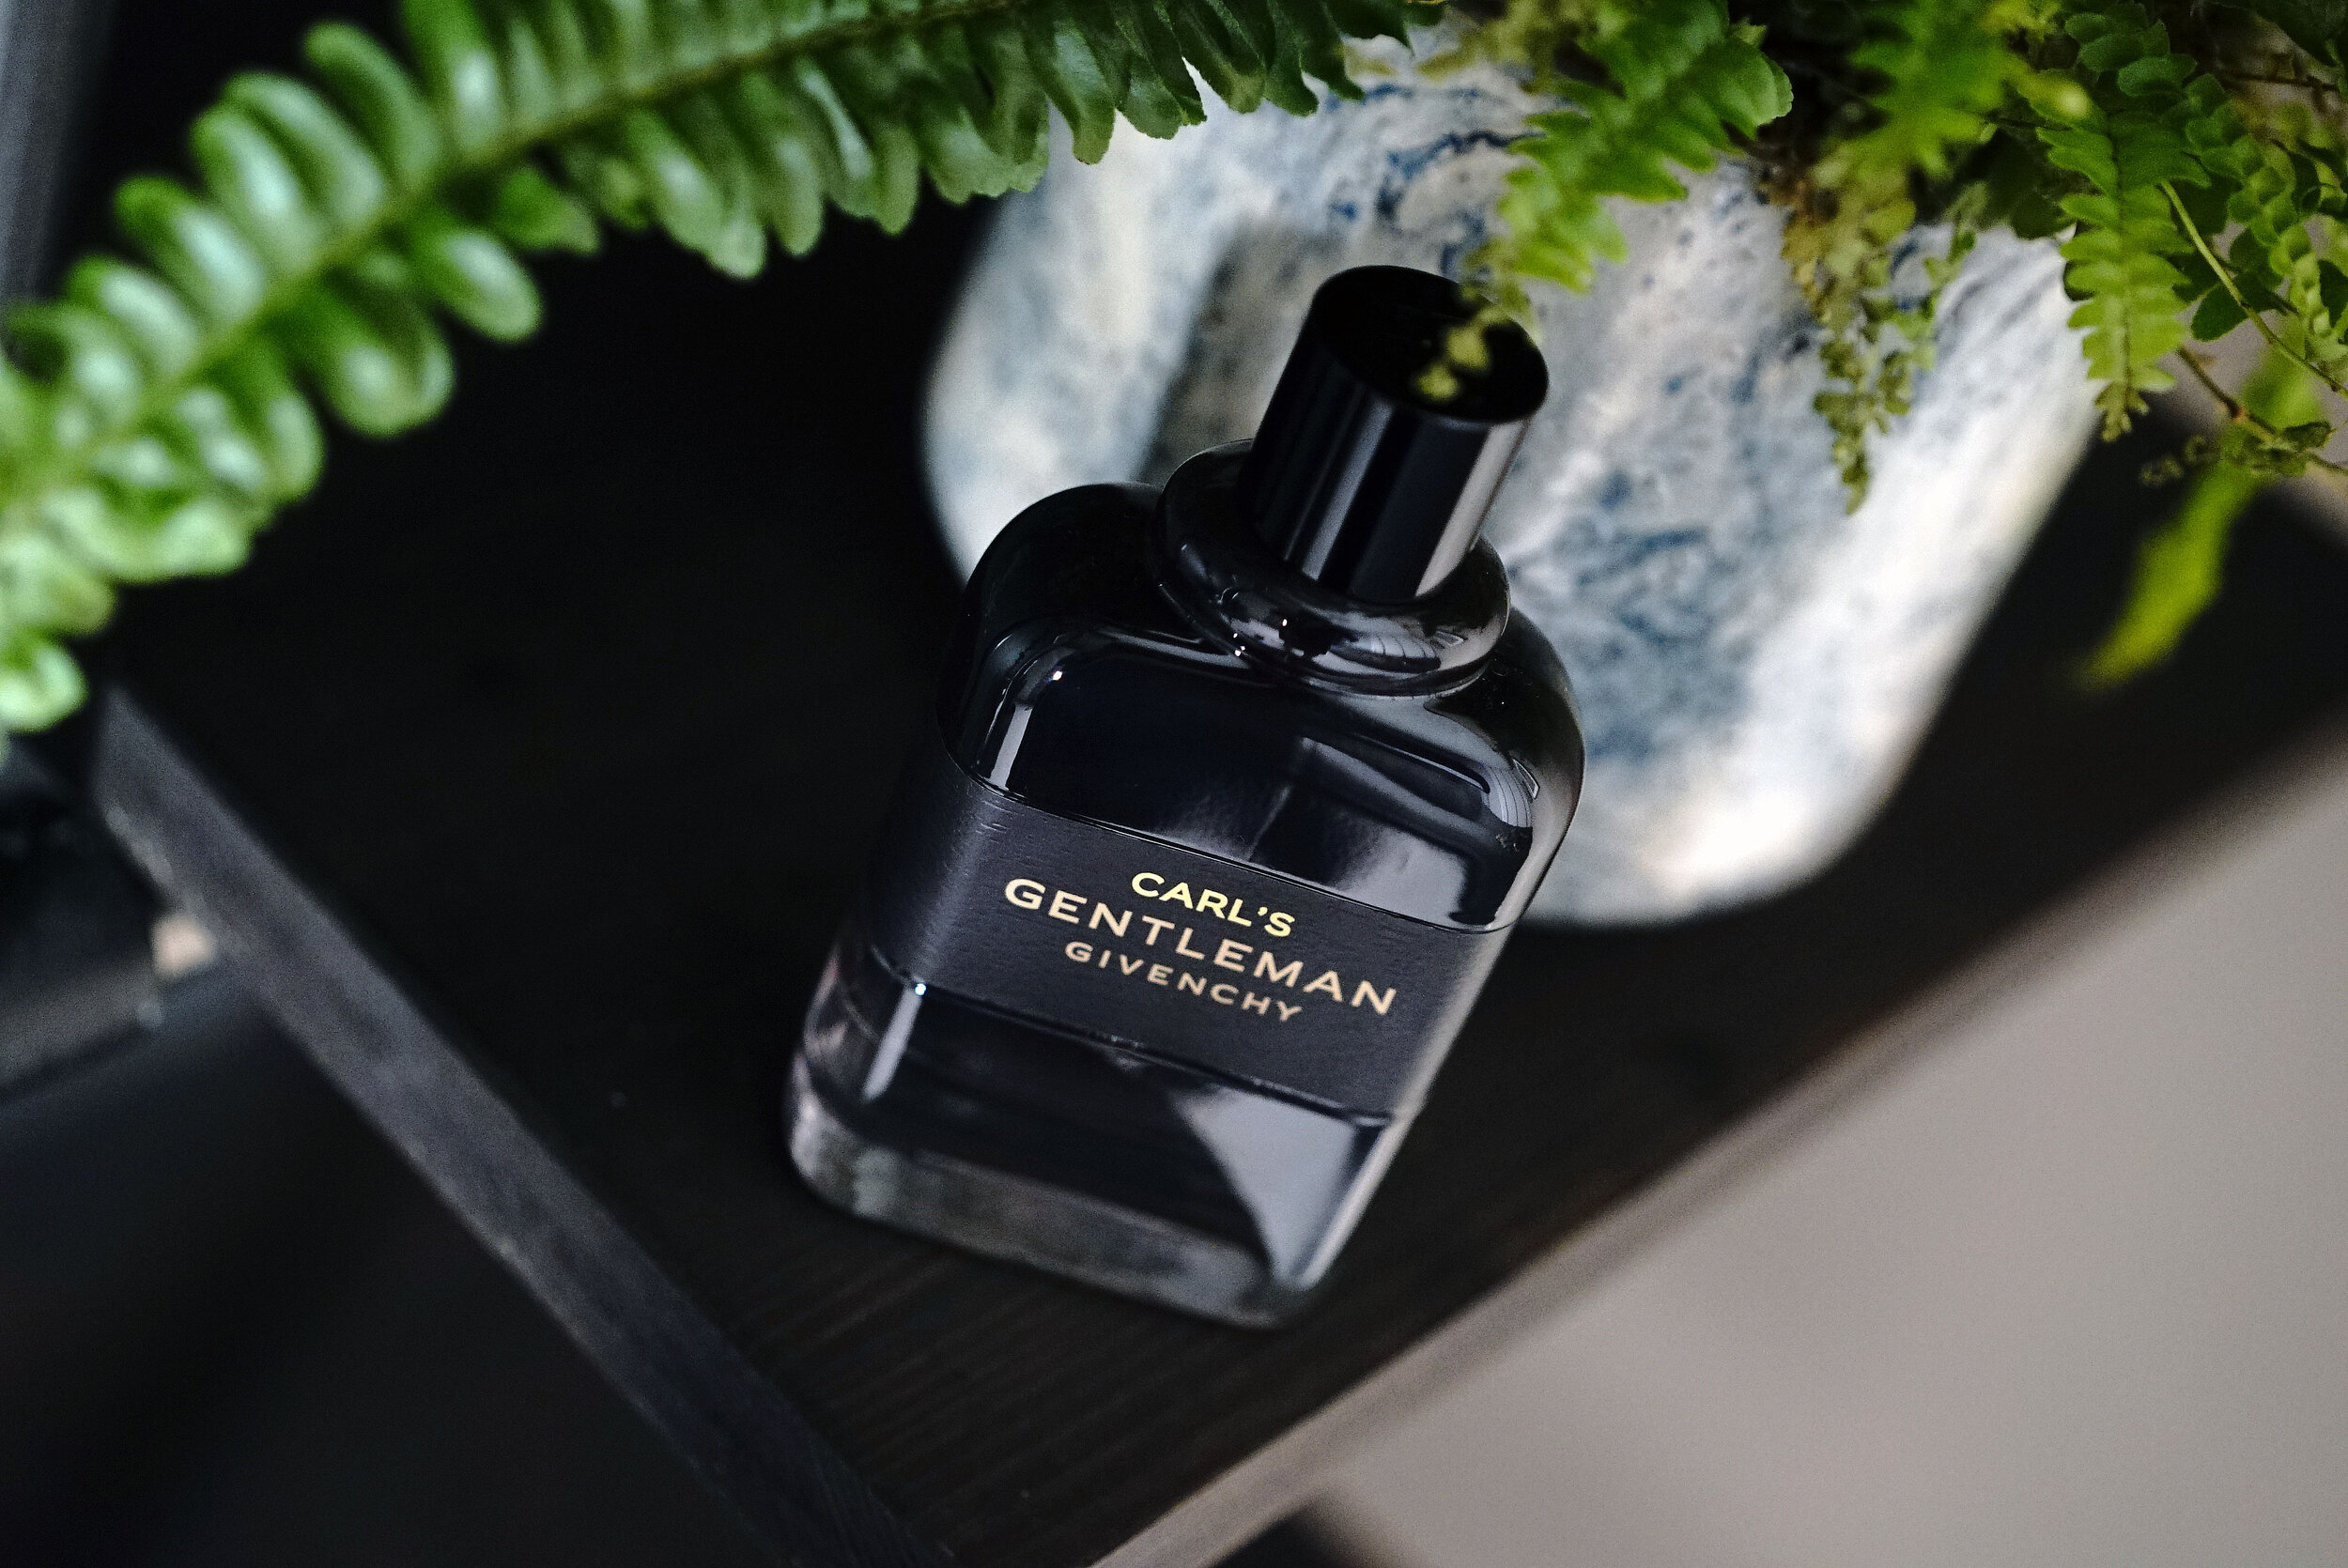 givenchy gentleman perfume review